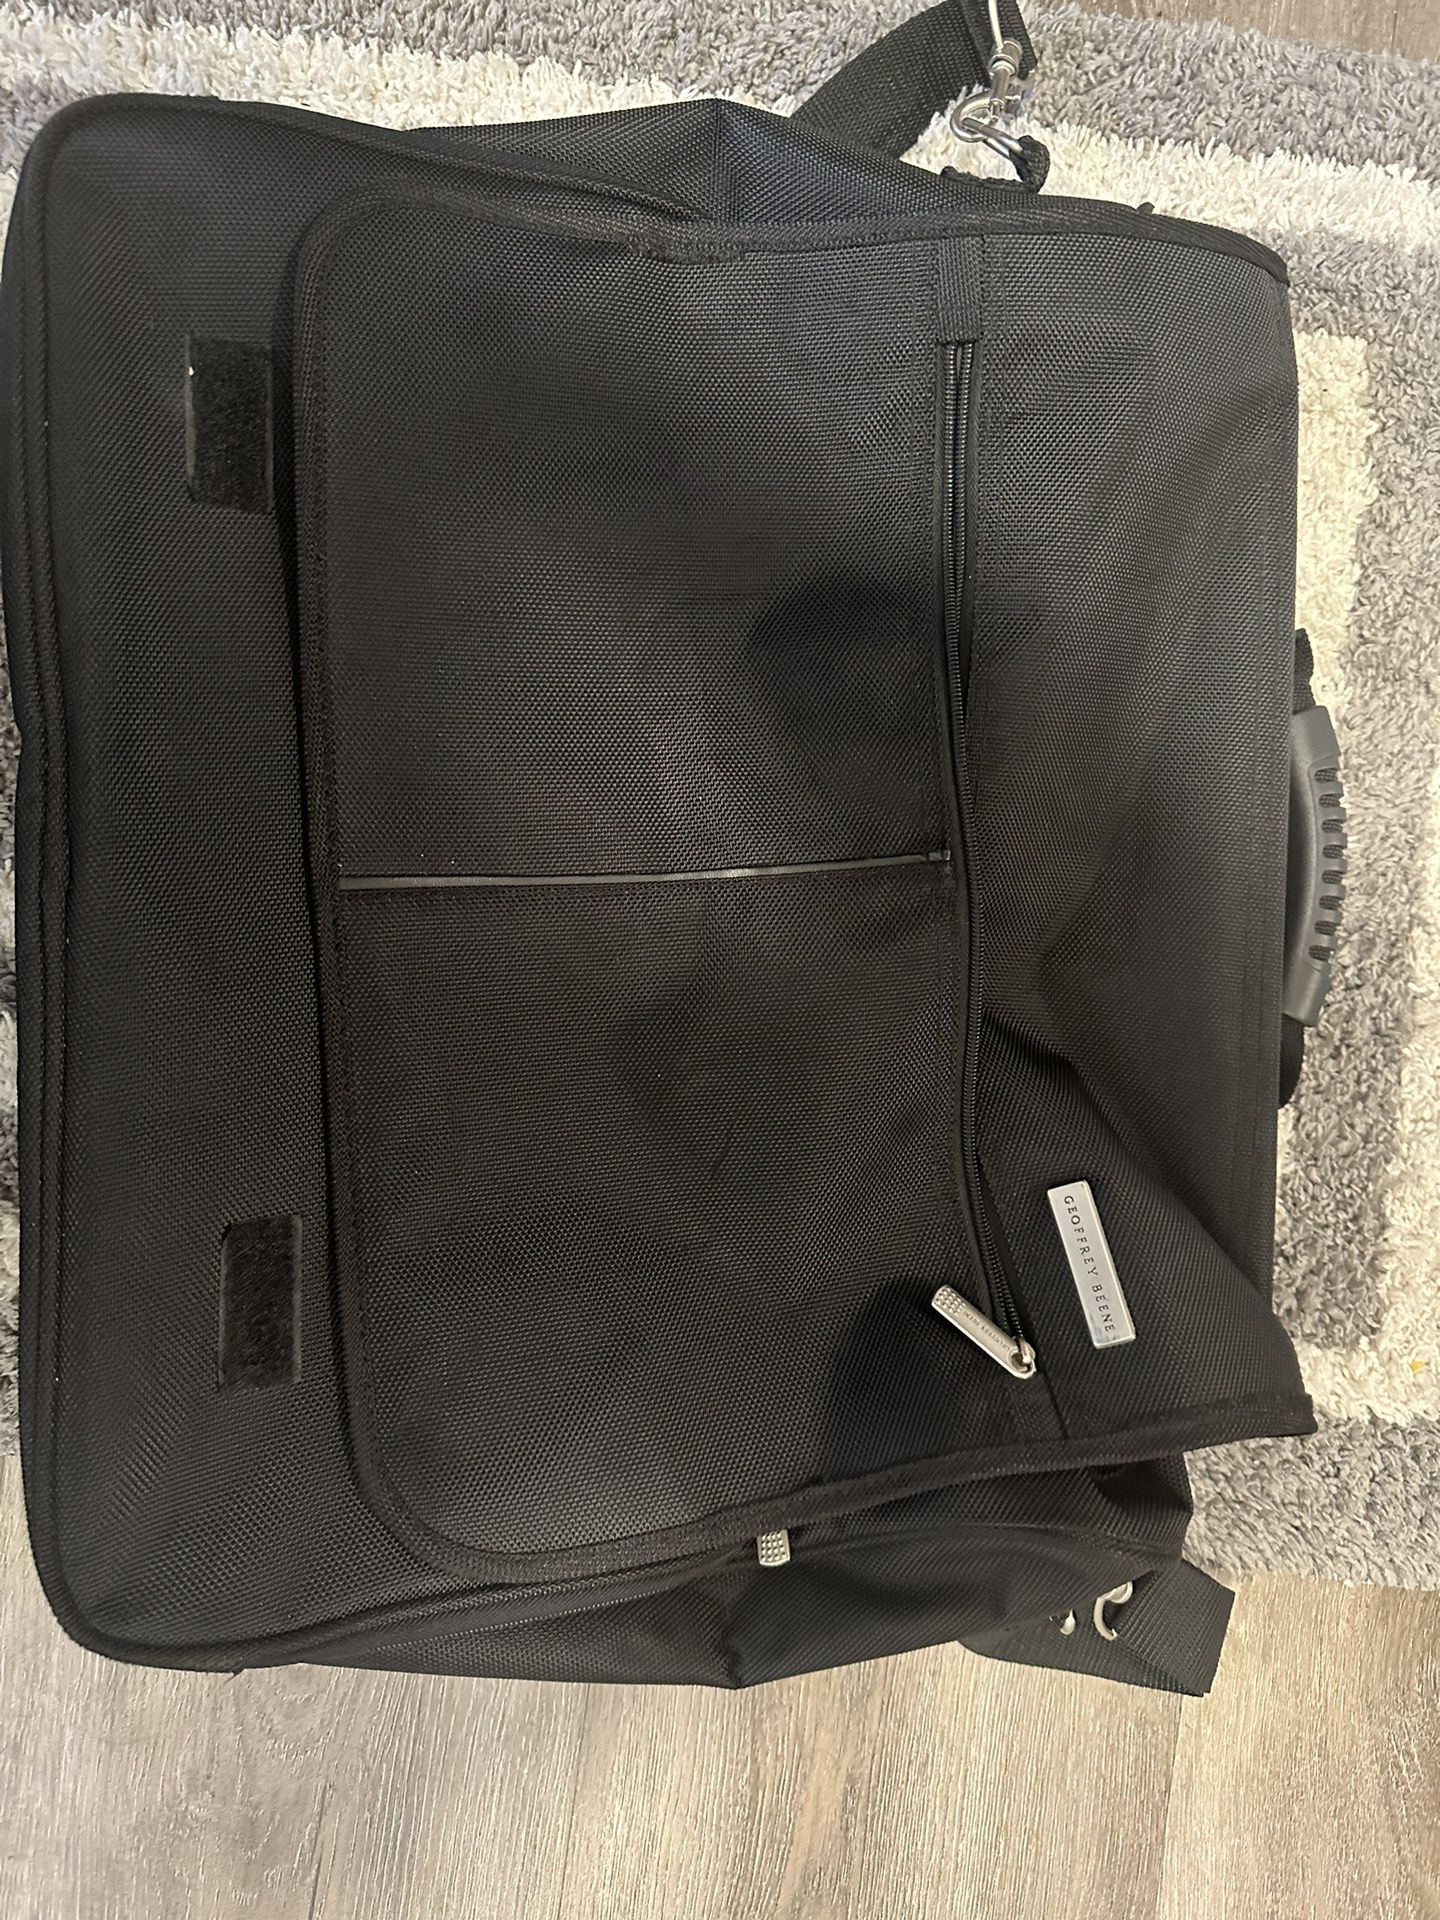 Laptop Carrying Case 